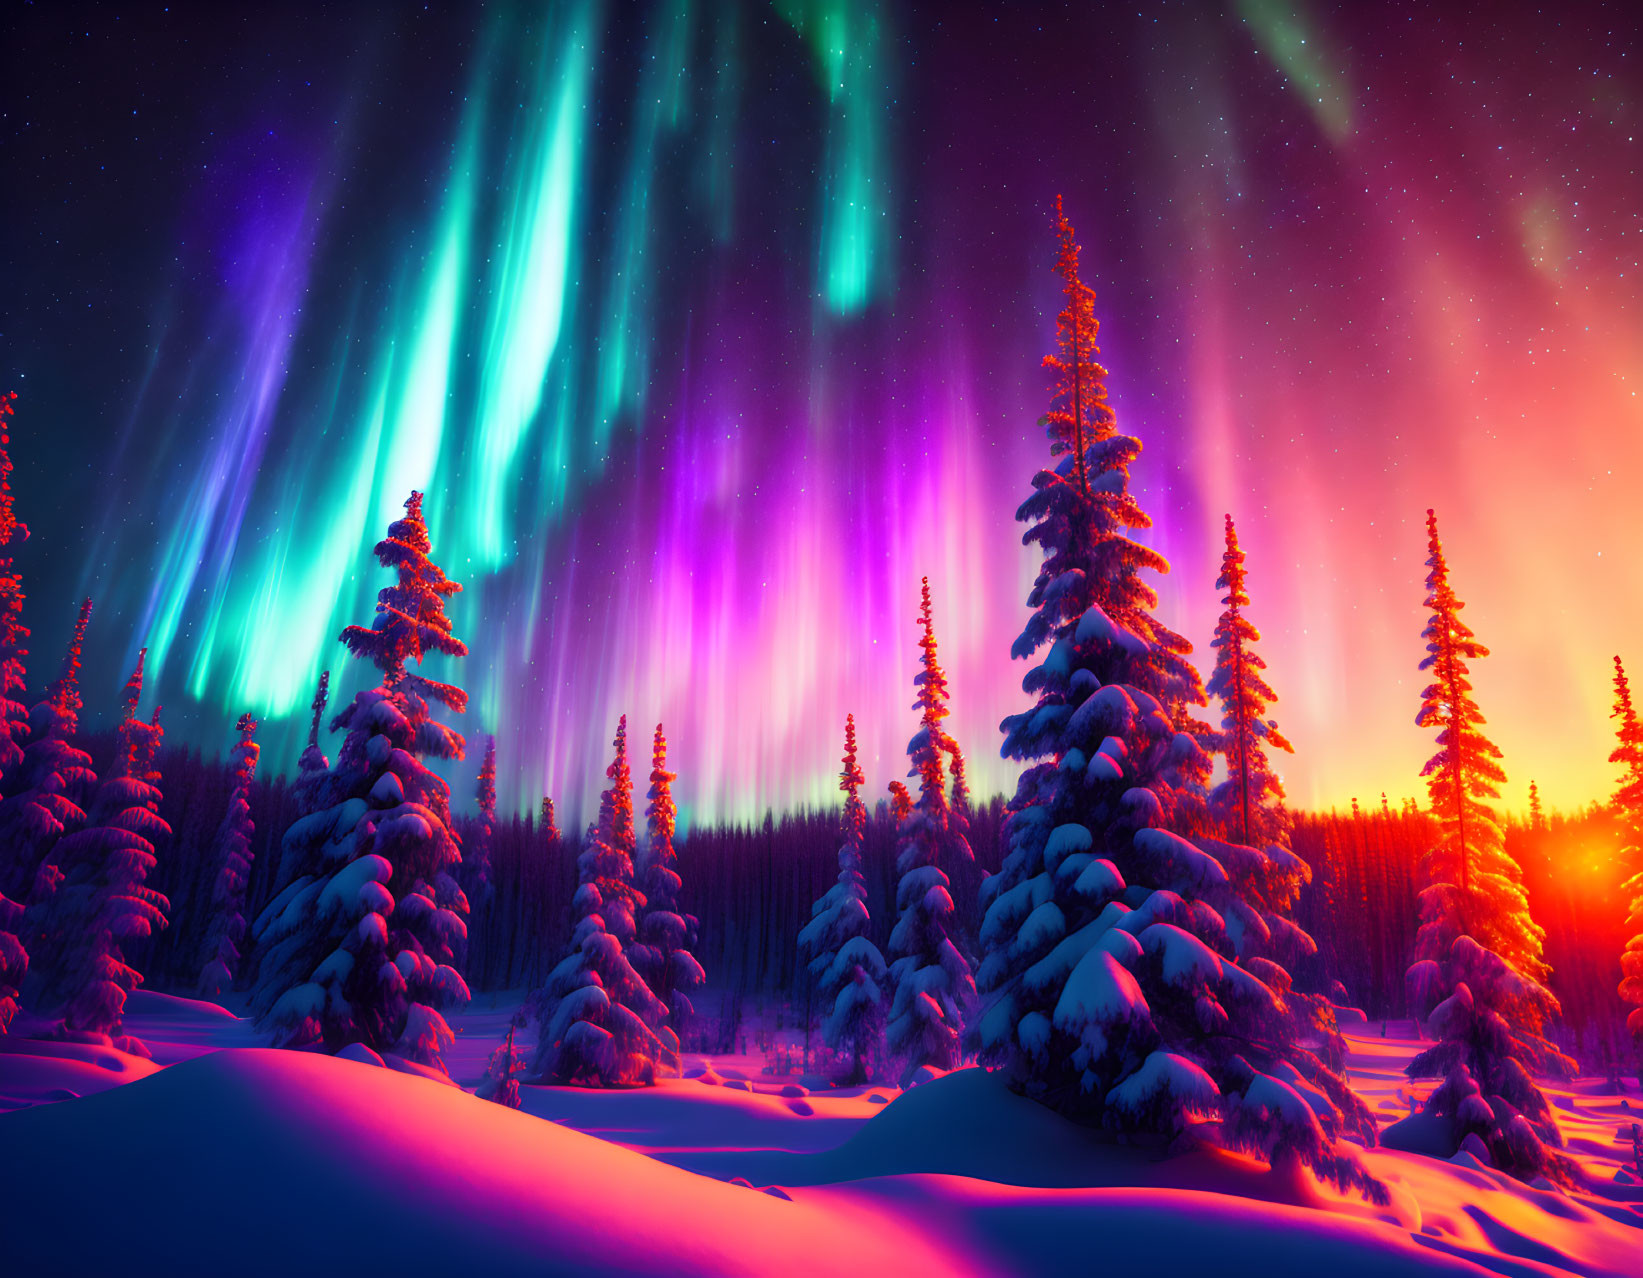 Nothern lights